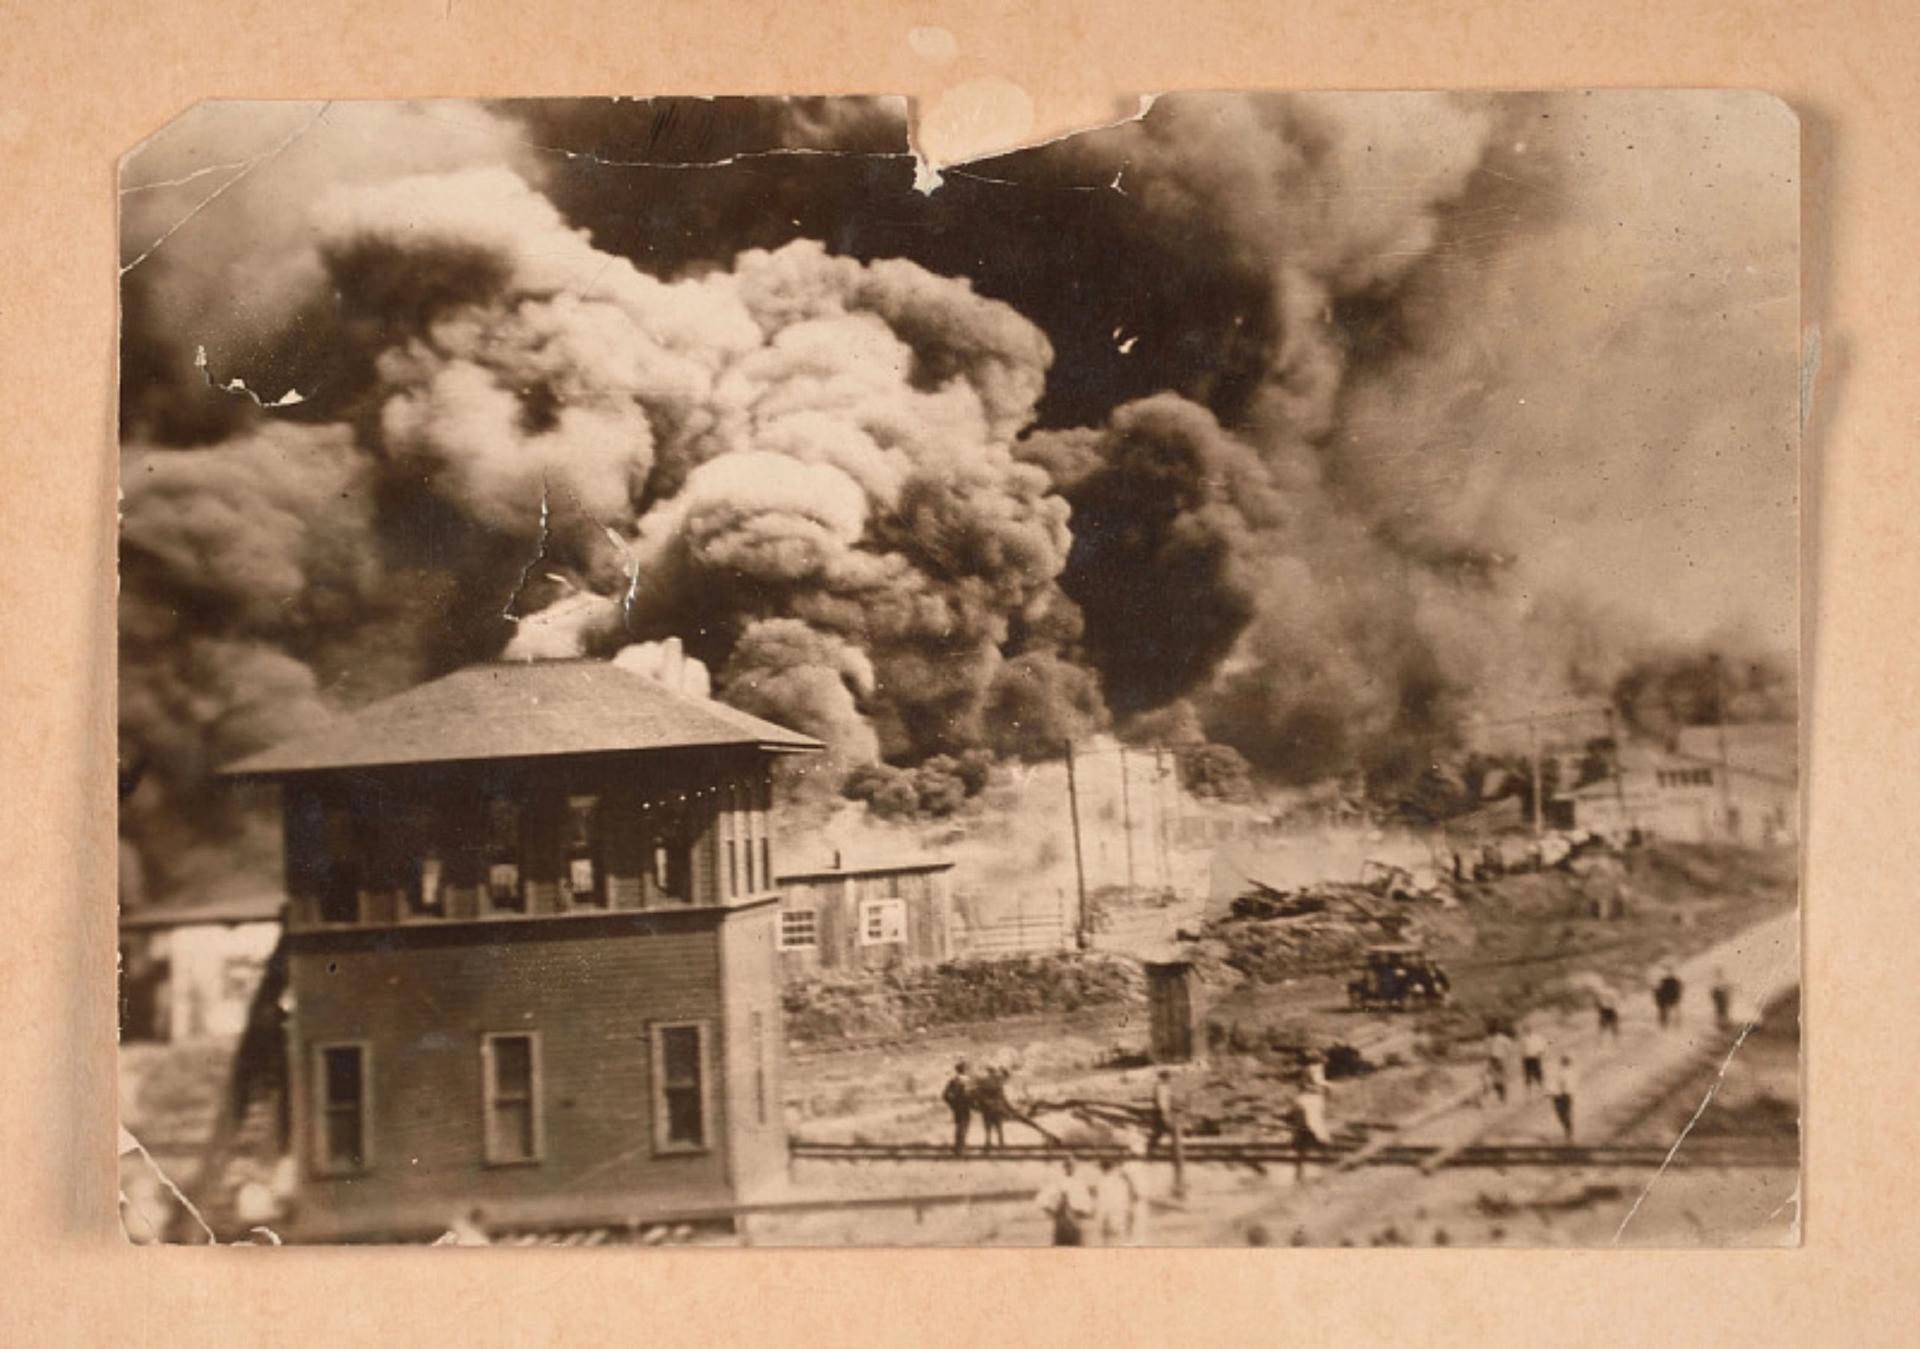 A 1921 photograph of the Greenwood District burning during the Tulsa Race Massacre Photo: Collection of the Smithsonian National Museum of African American History and Culture